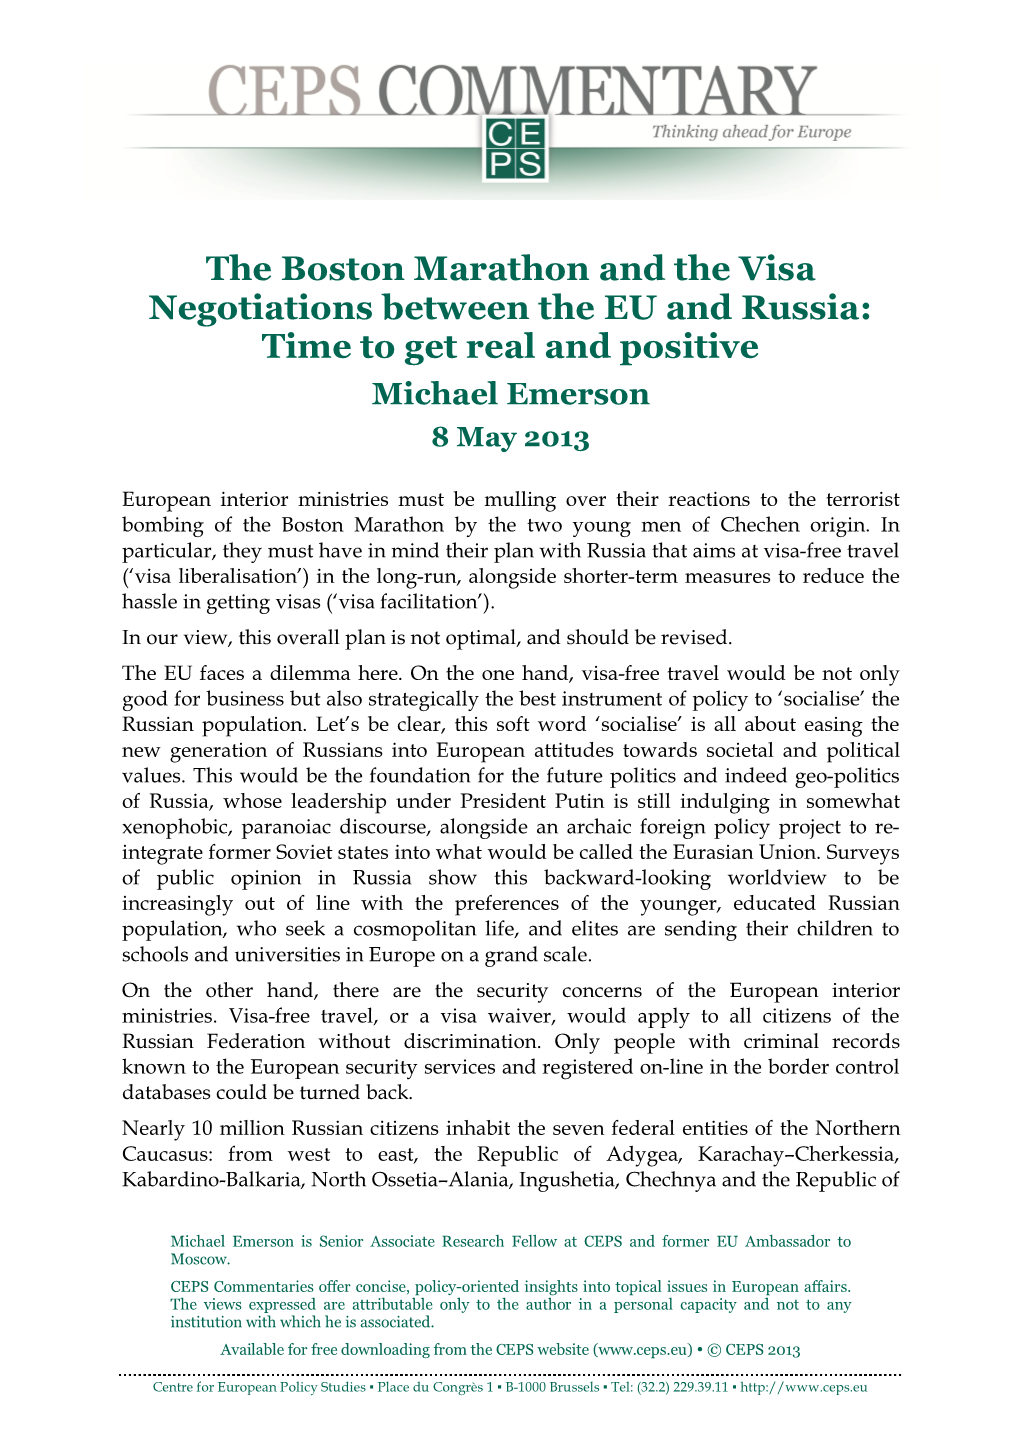 The Boston Marathon and the Visa Negotiations Between the EU and Russia: Time to Get Real and Positive Michael Emerson 8 May 2013